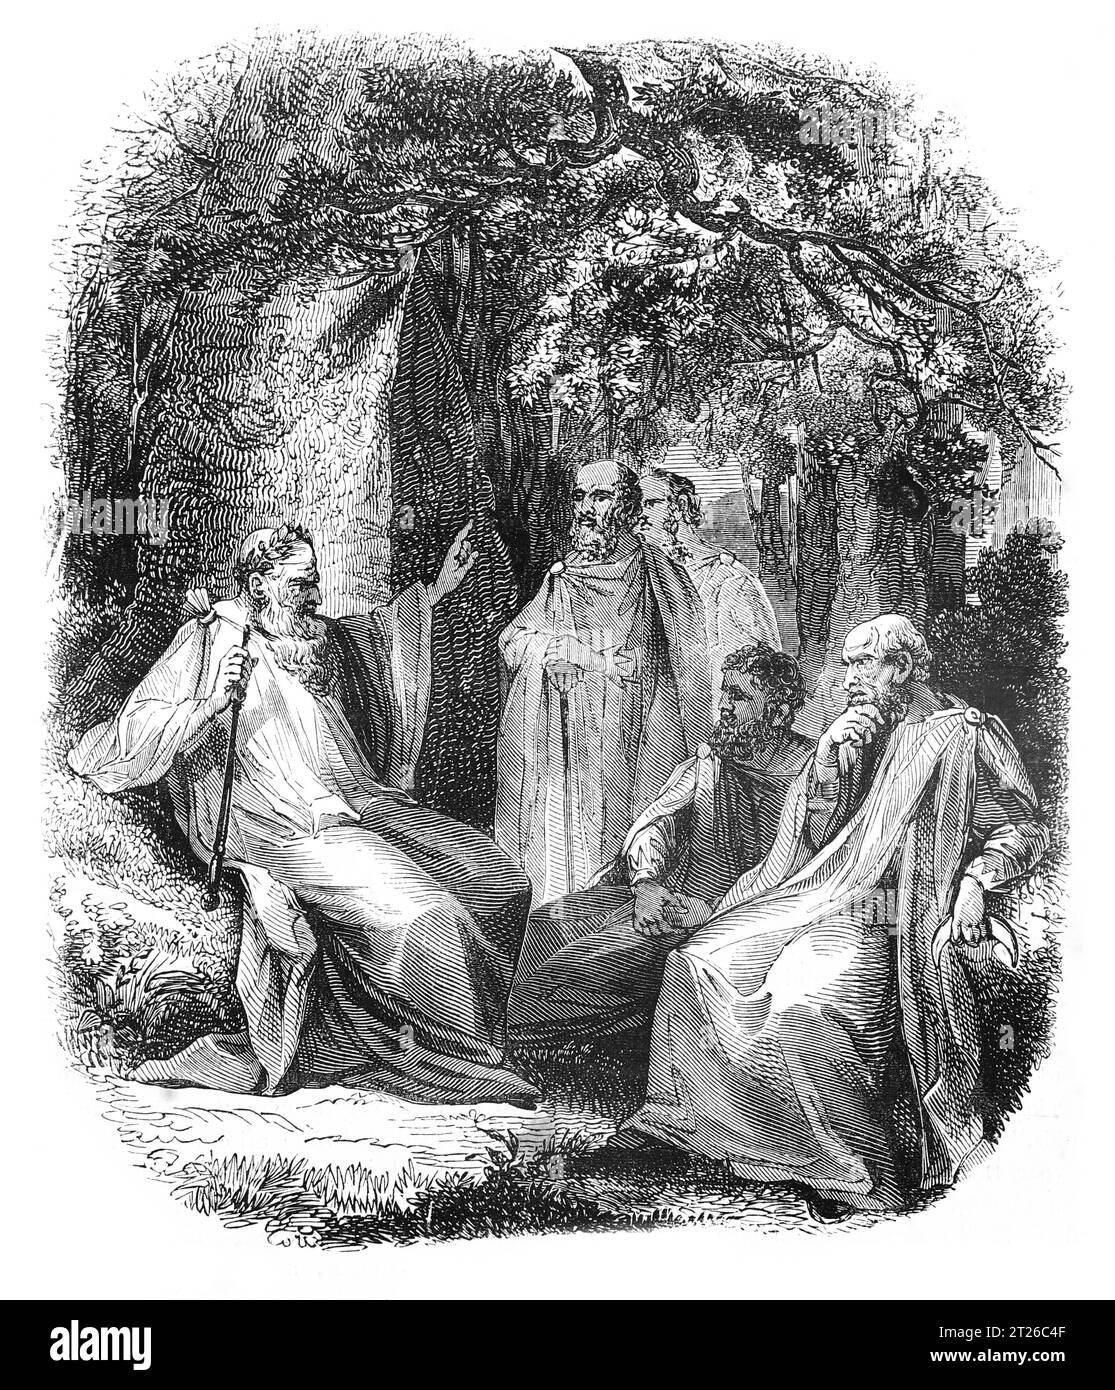 Arch-Druid and Druids. Black and White Illustration from the 'Old England' published by James Sangster in 1860. Stock Photo